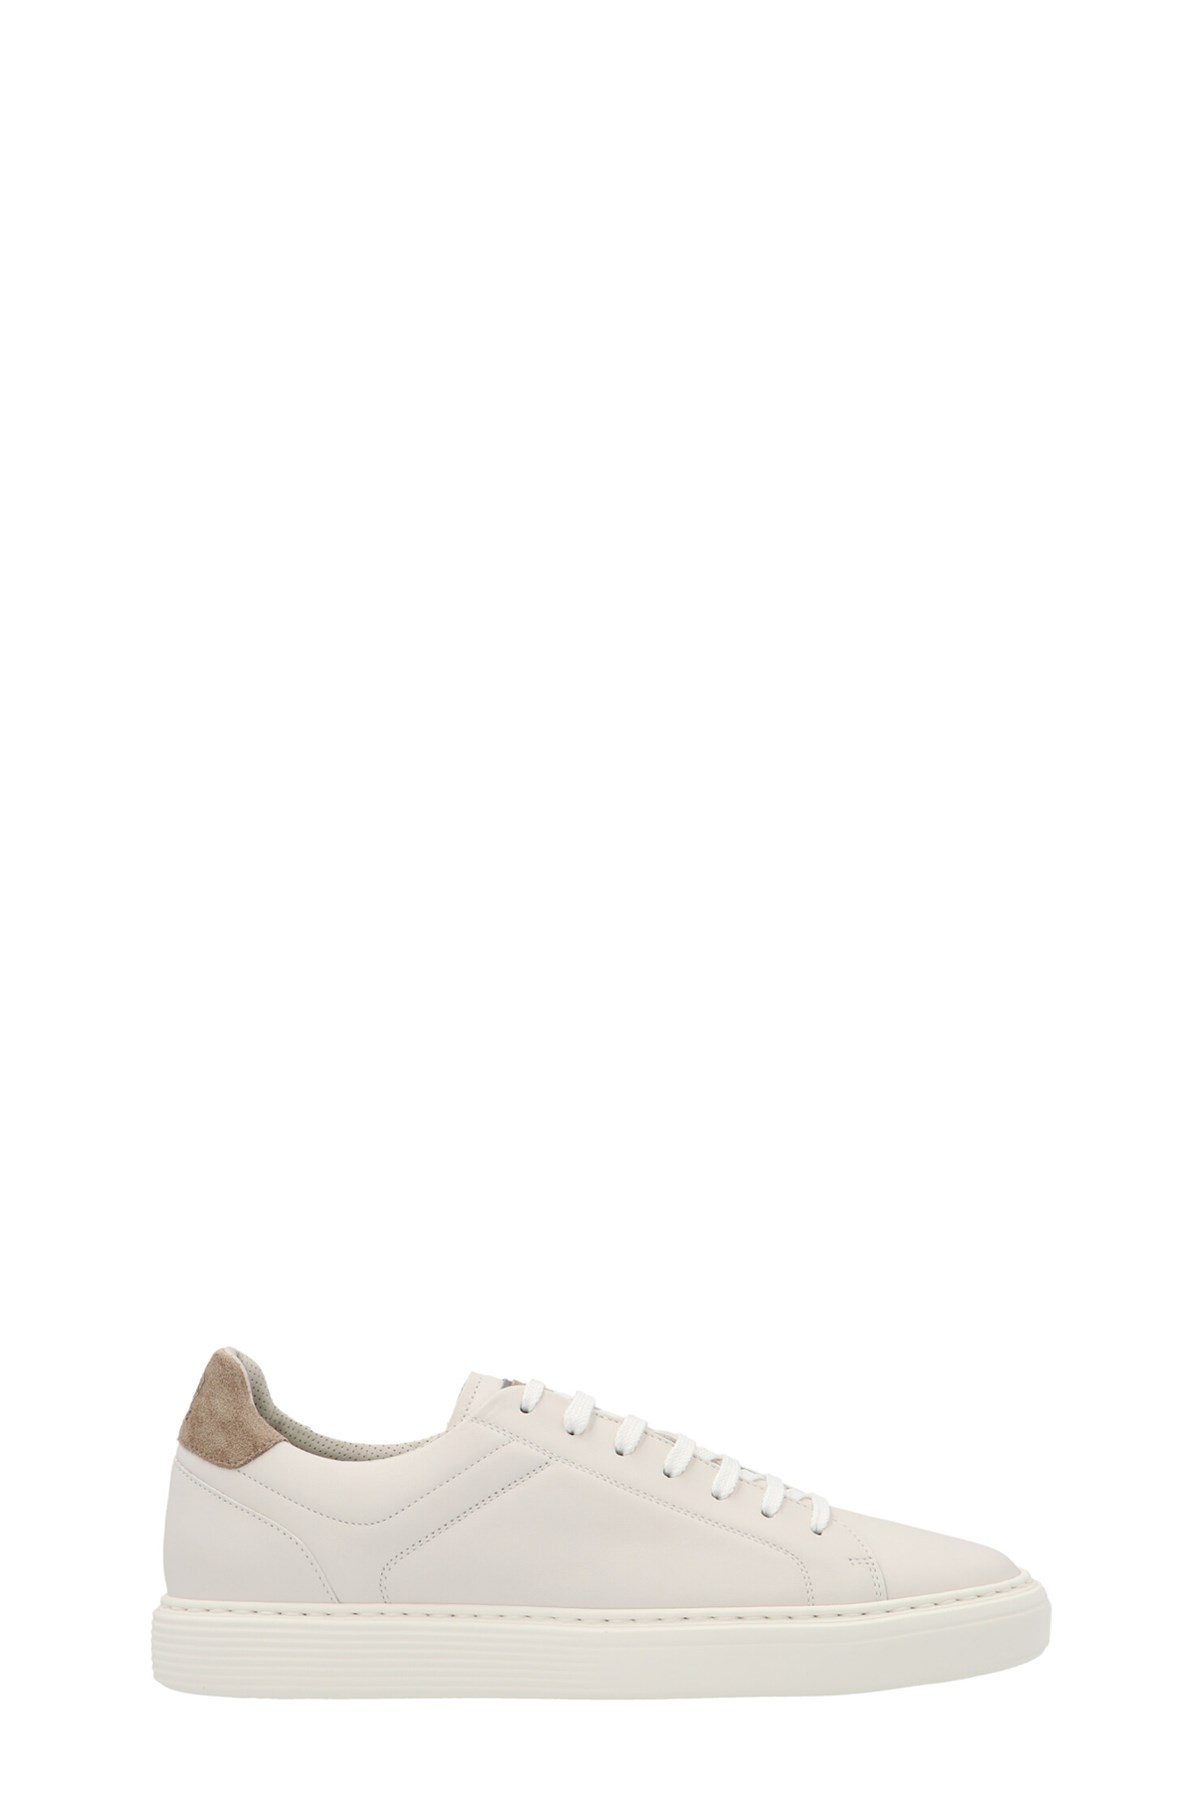 BRUNELLO CUCINELLI Low Leather Sneakers